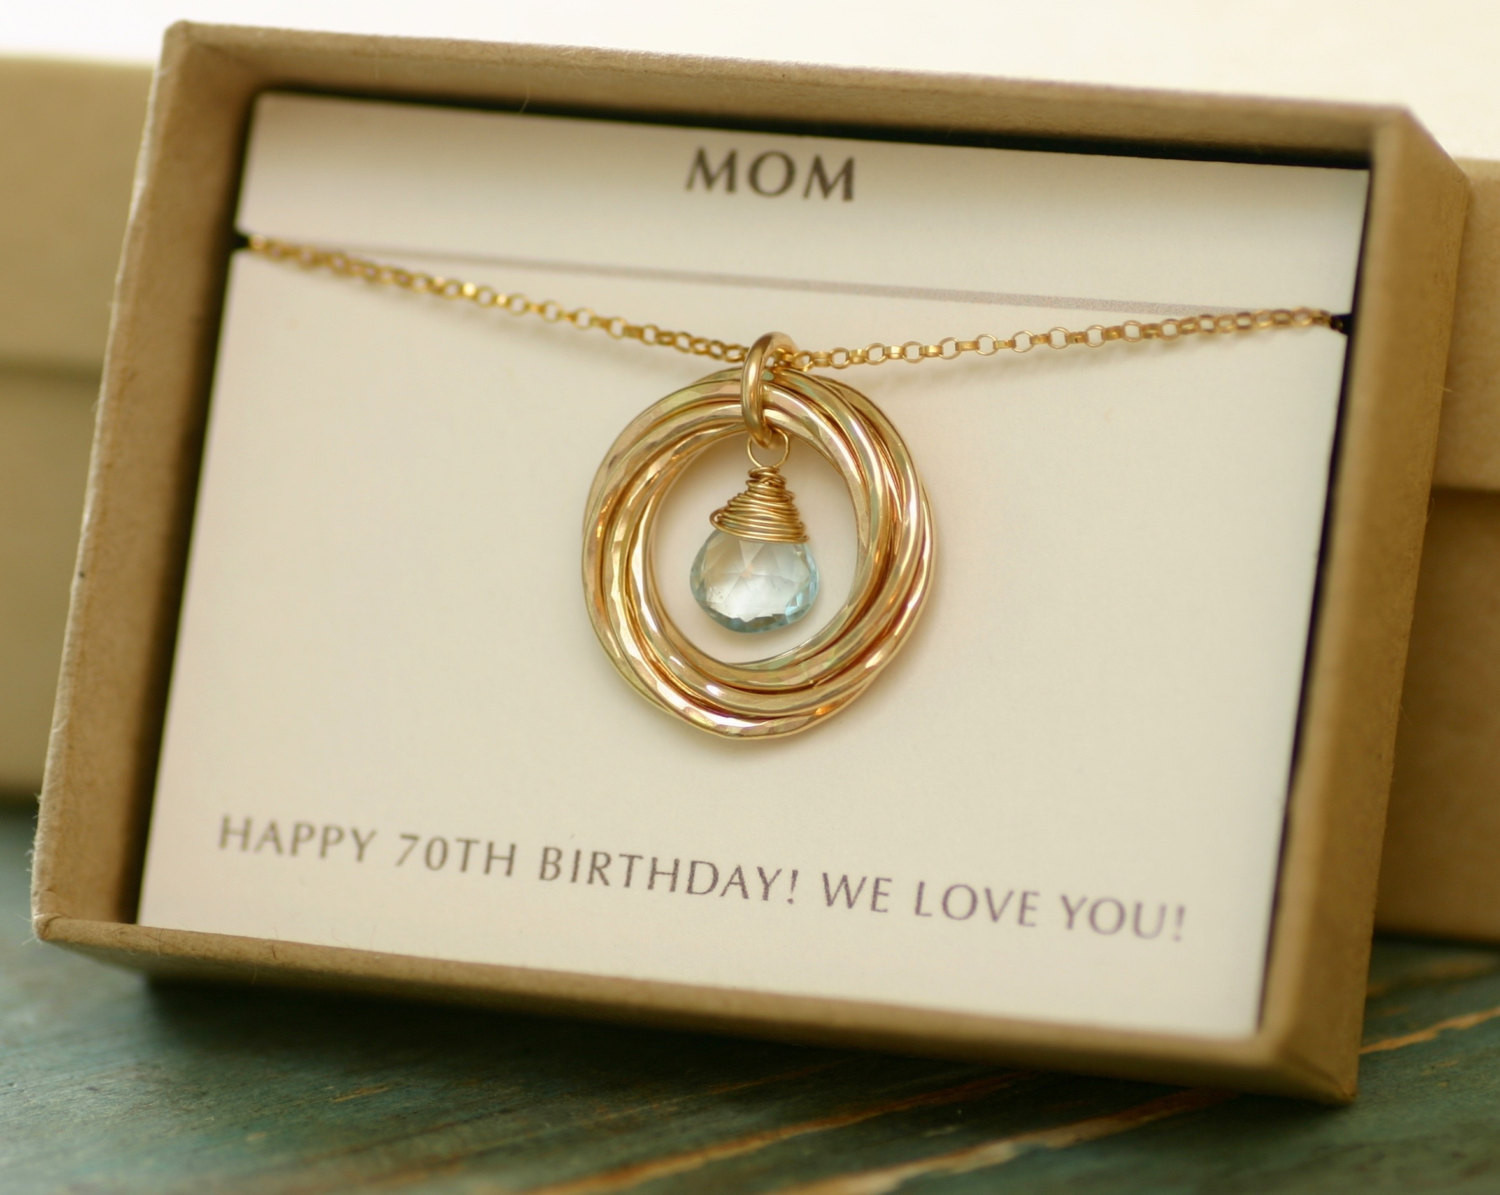 The top 20 Ideas About 70th Birthday Gift Ideas for Mom